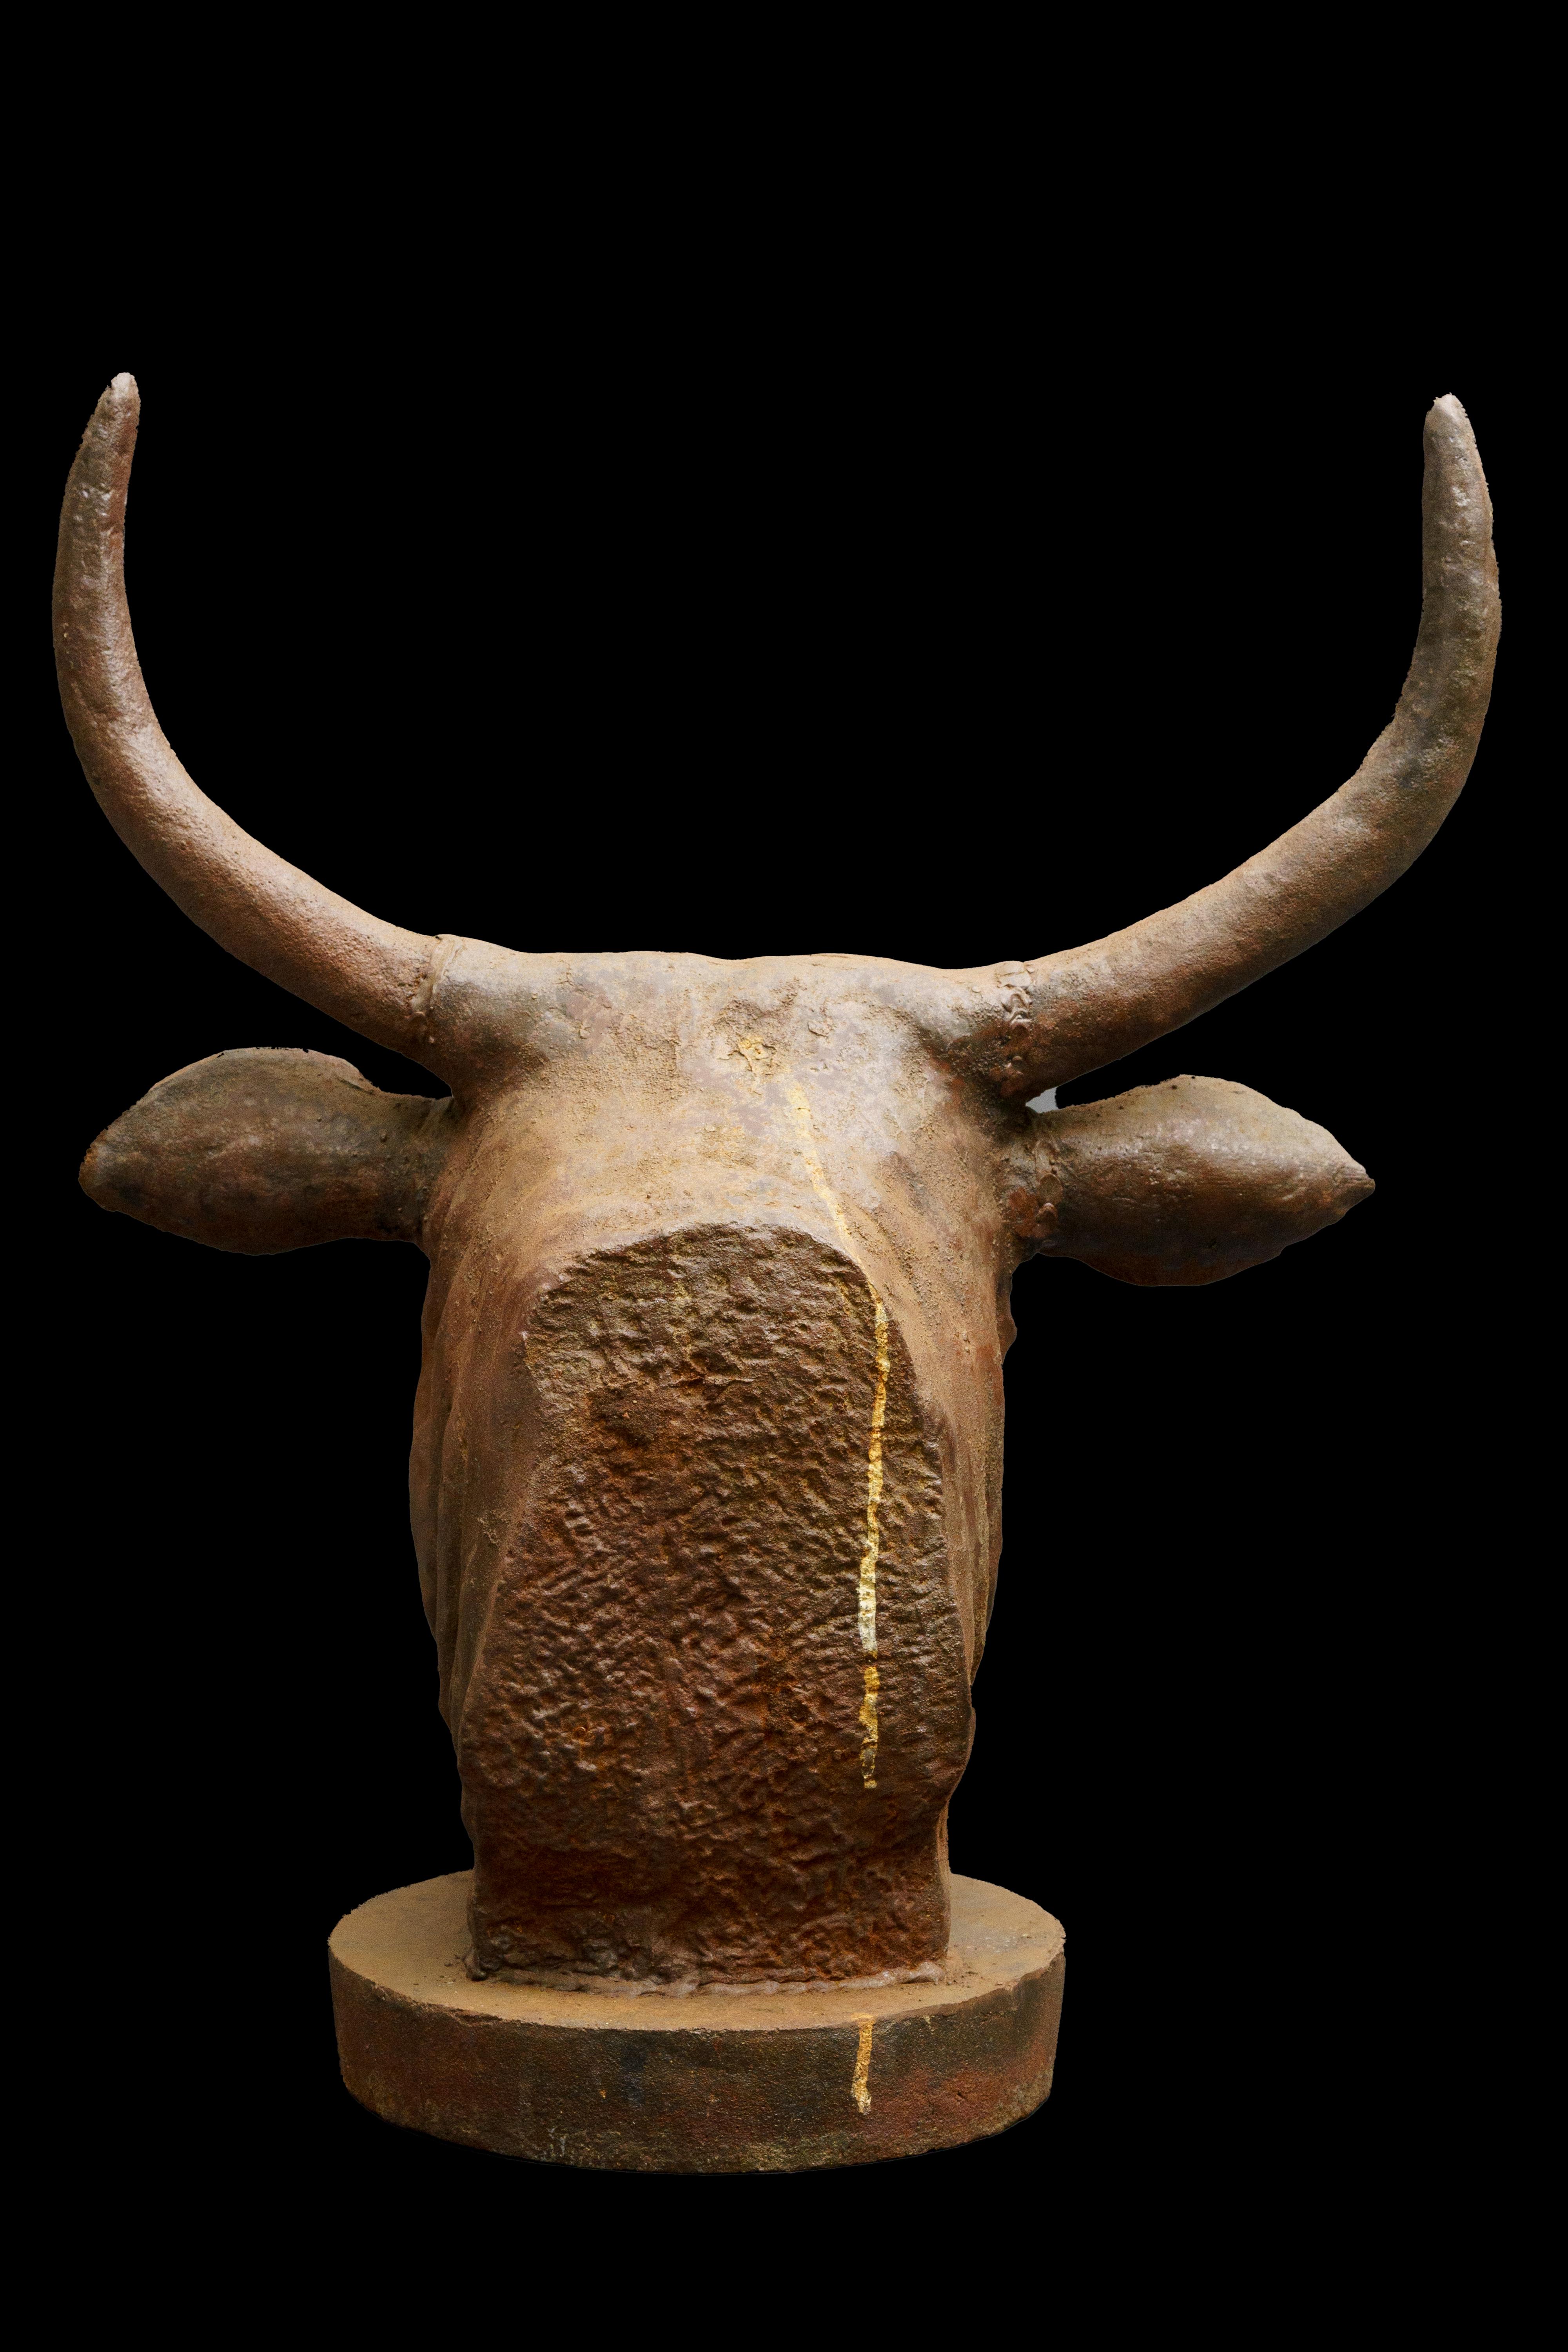 Life size cast Iron bulls head bust.

Measures approximately: 20